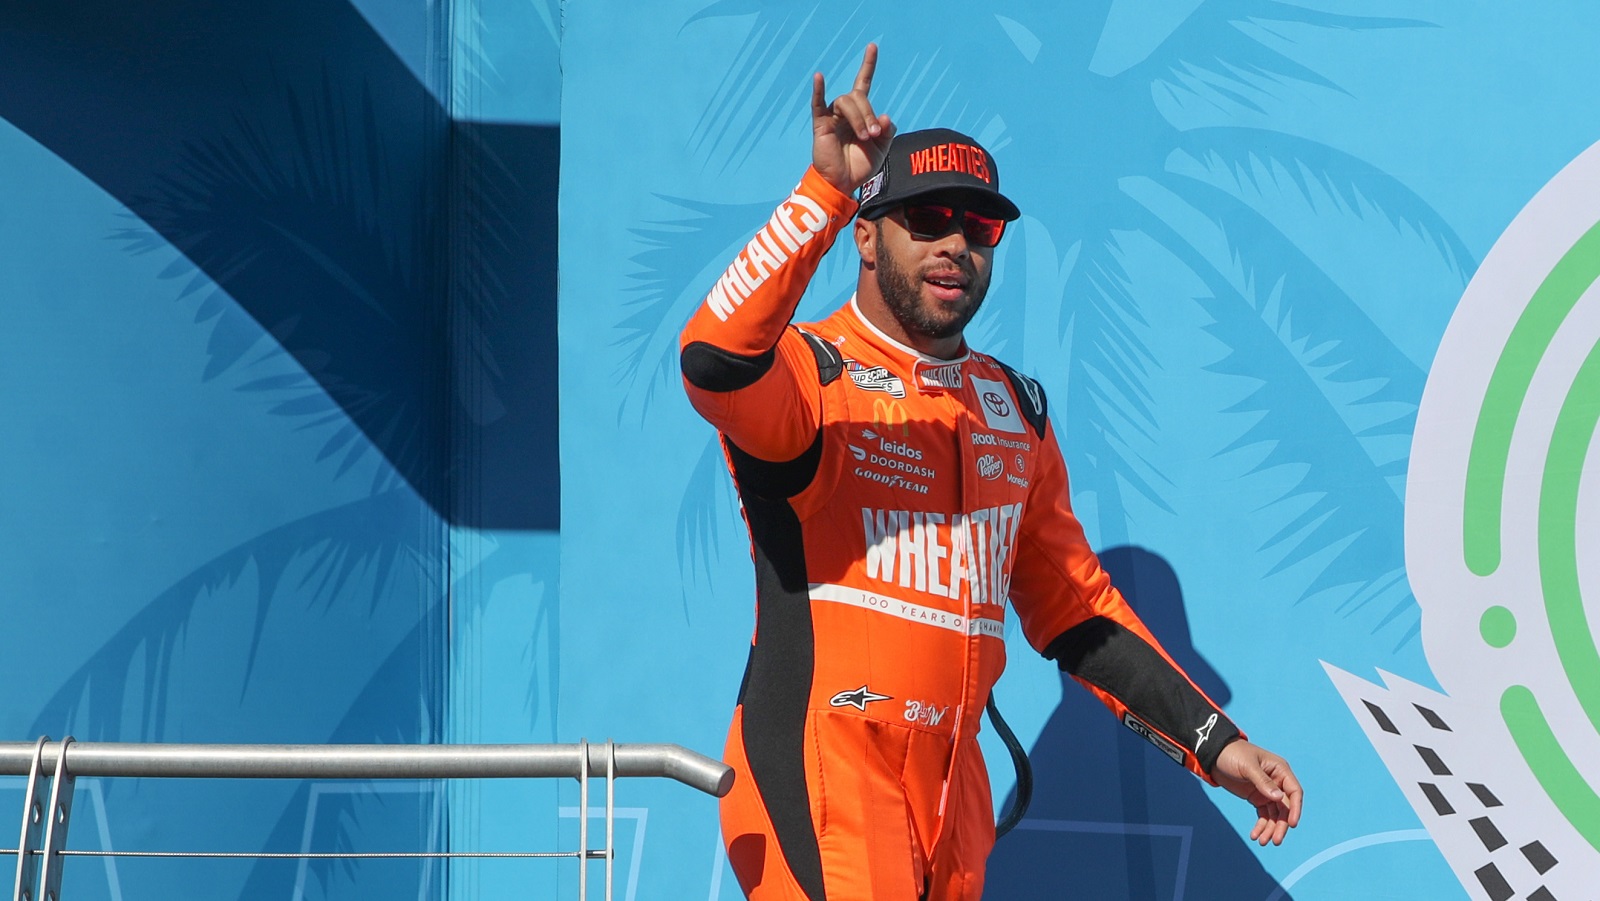 Bubba Wallace waves to fans as he walks onstage during driver intros for the NASCAR Cup Series Wise Power 400 at Auto Club Speedway on Feb. 27, 2022 in Fontana, California.